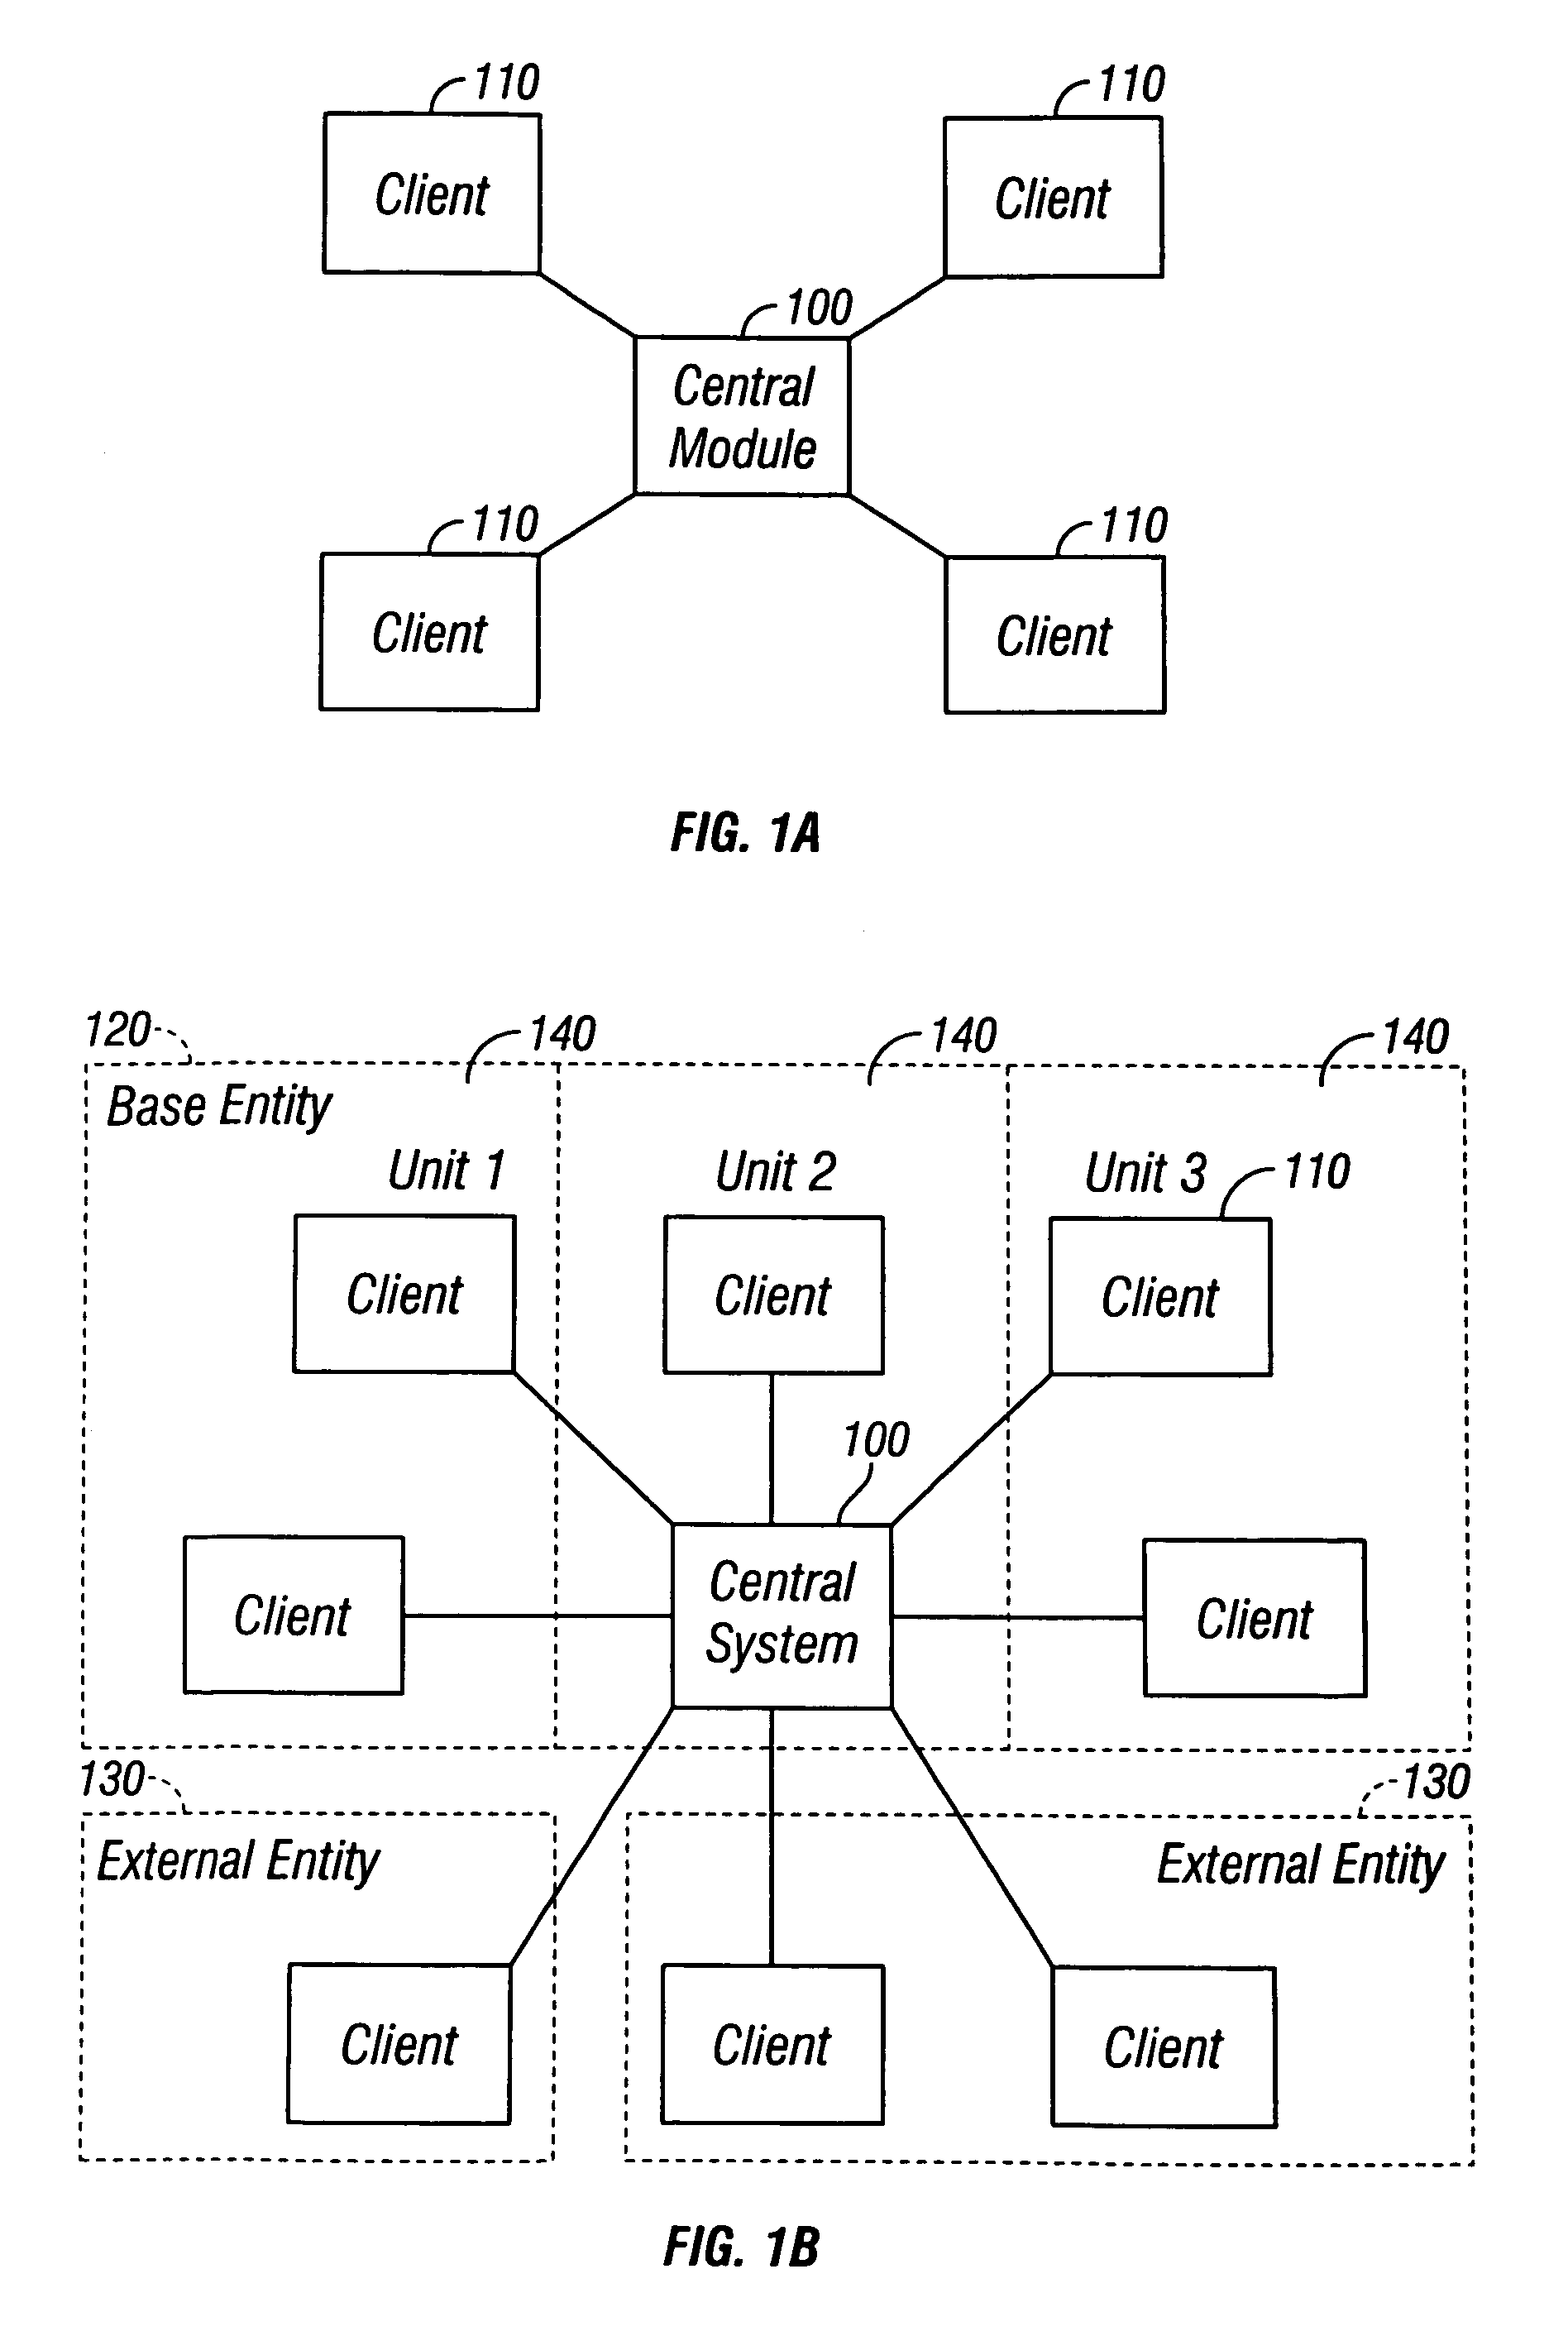 Collaborative master data management system for identifying similar objects including identical and non-identical attributes